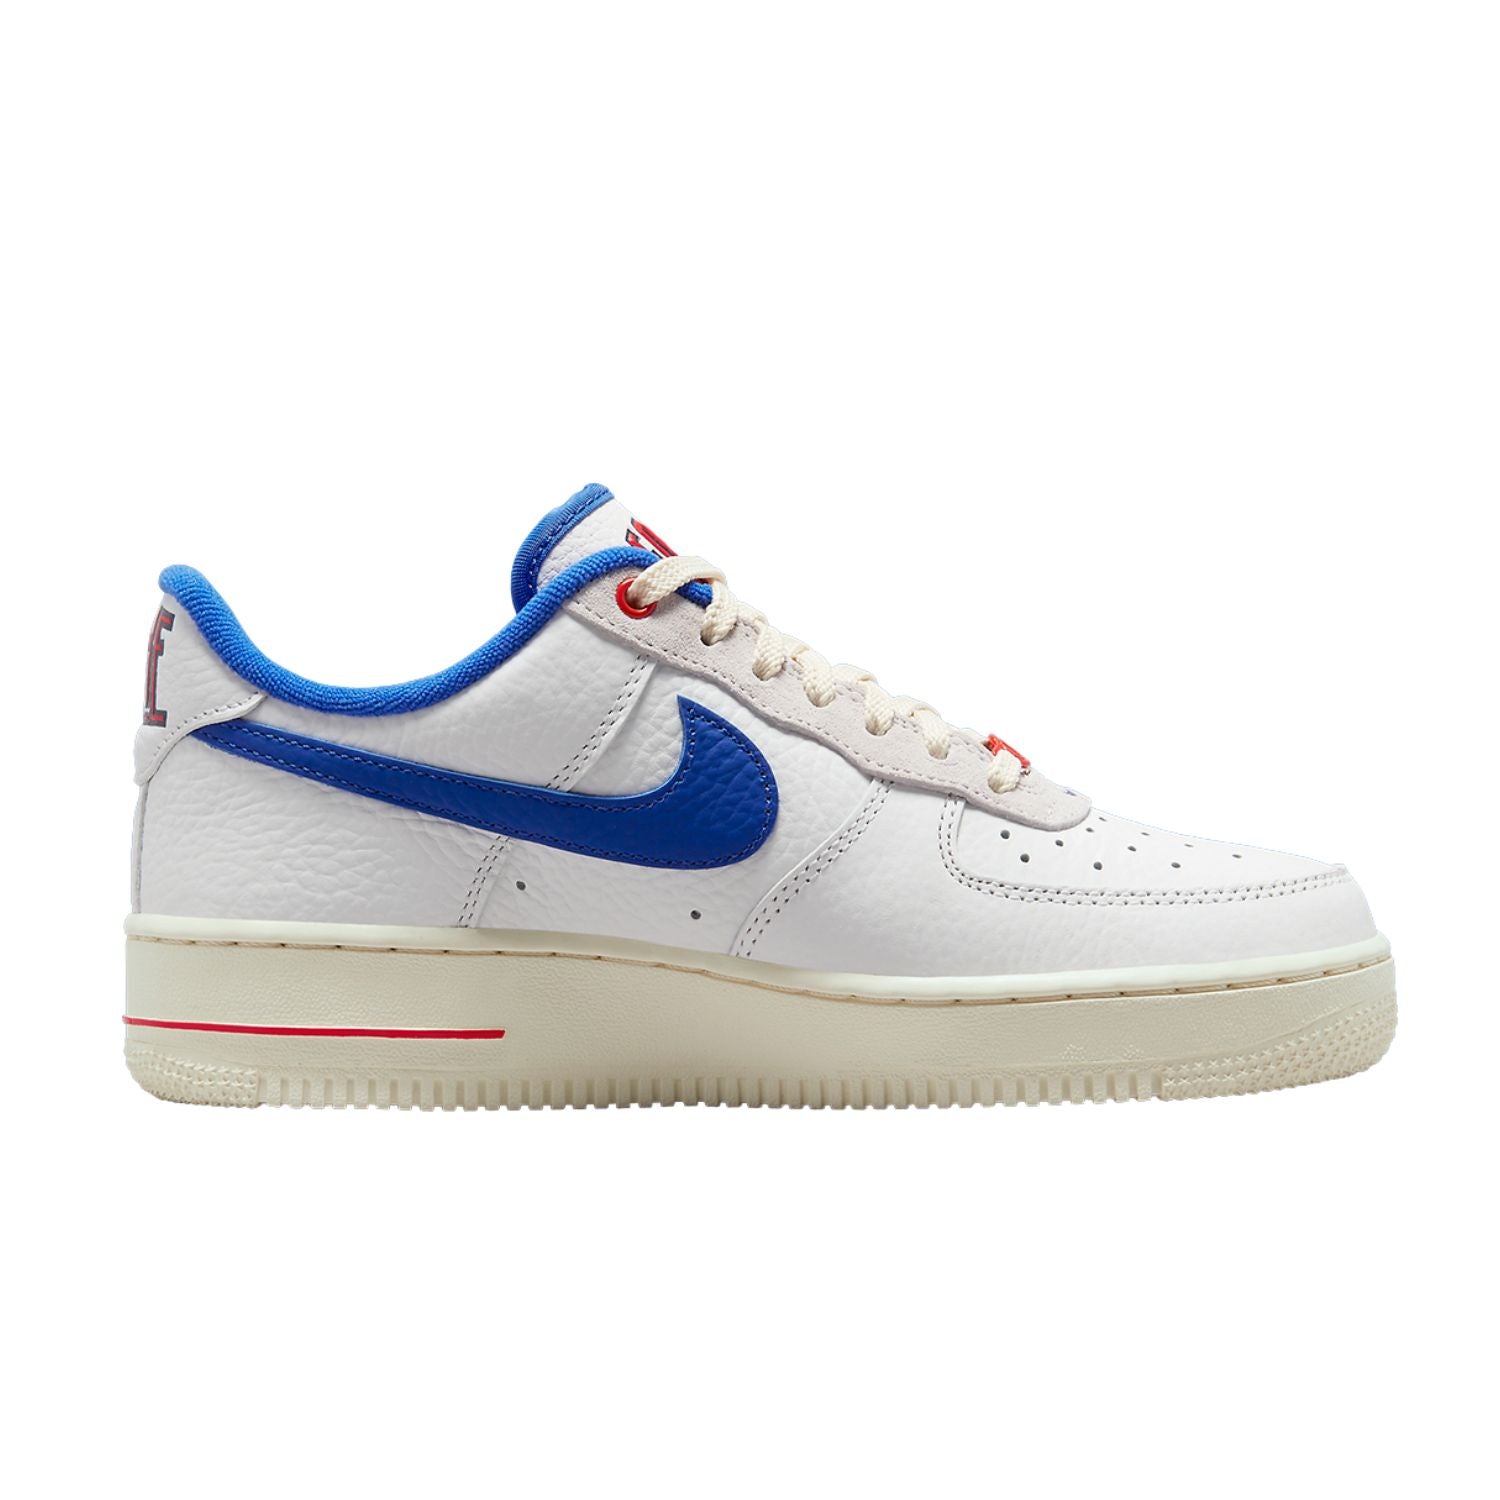 Nike Air Force 1 '07 Lx Womens Style : Dr0148-100